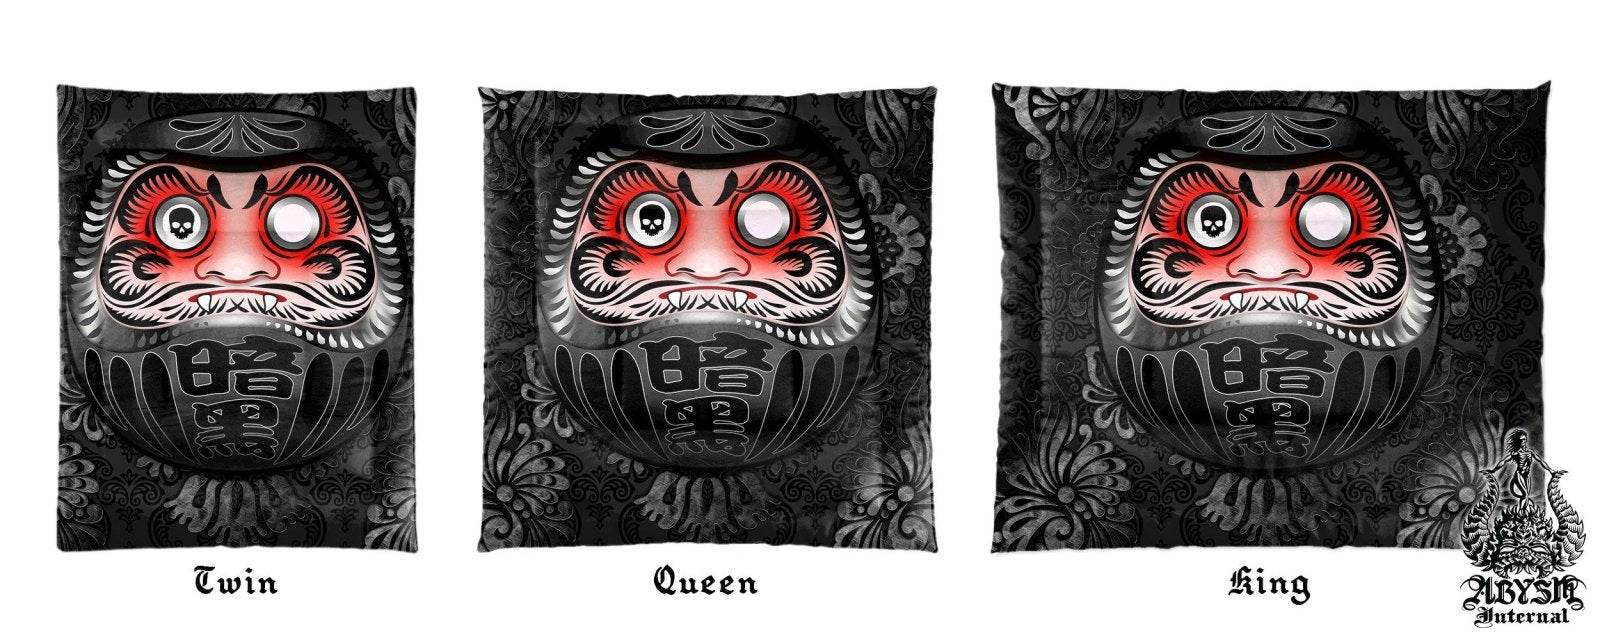 Black Daruma Bedding Set, Comforter and Duvet, Funny Goth Bed Cover and Bedroom Decor, King, Queen and Twin Size - Japanese Art - Abysm Internal